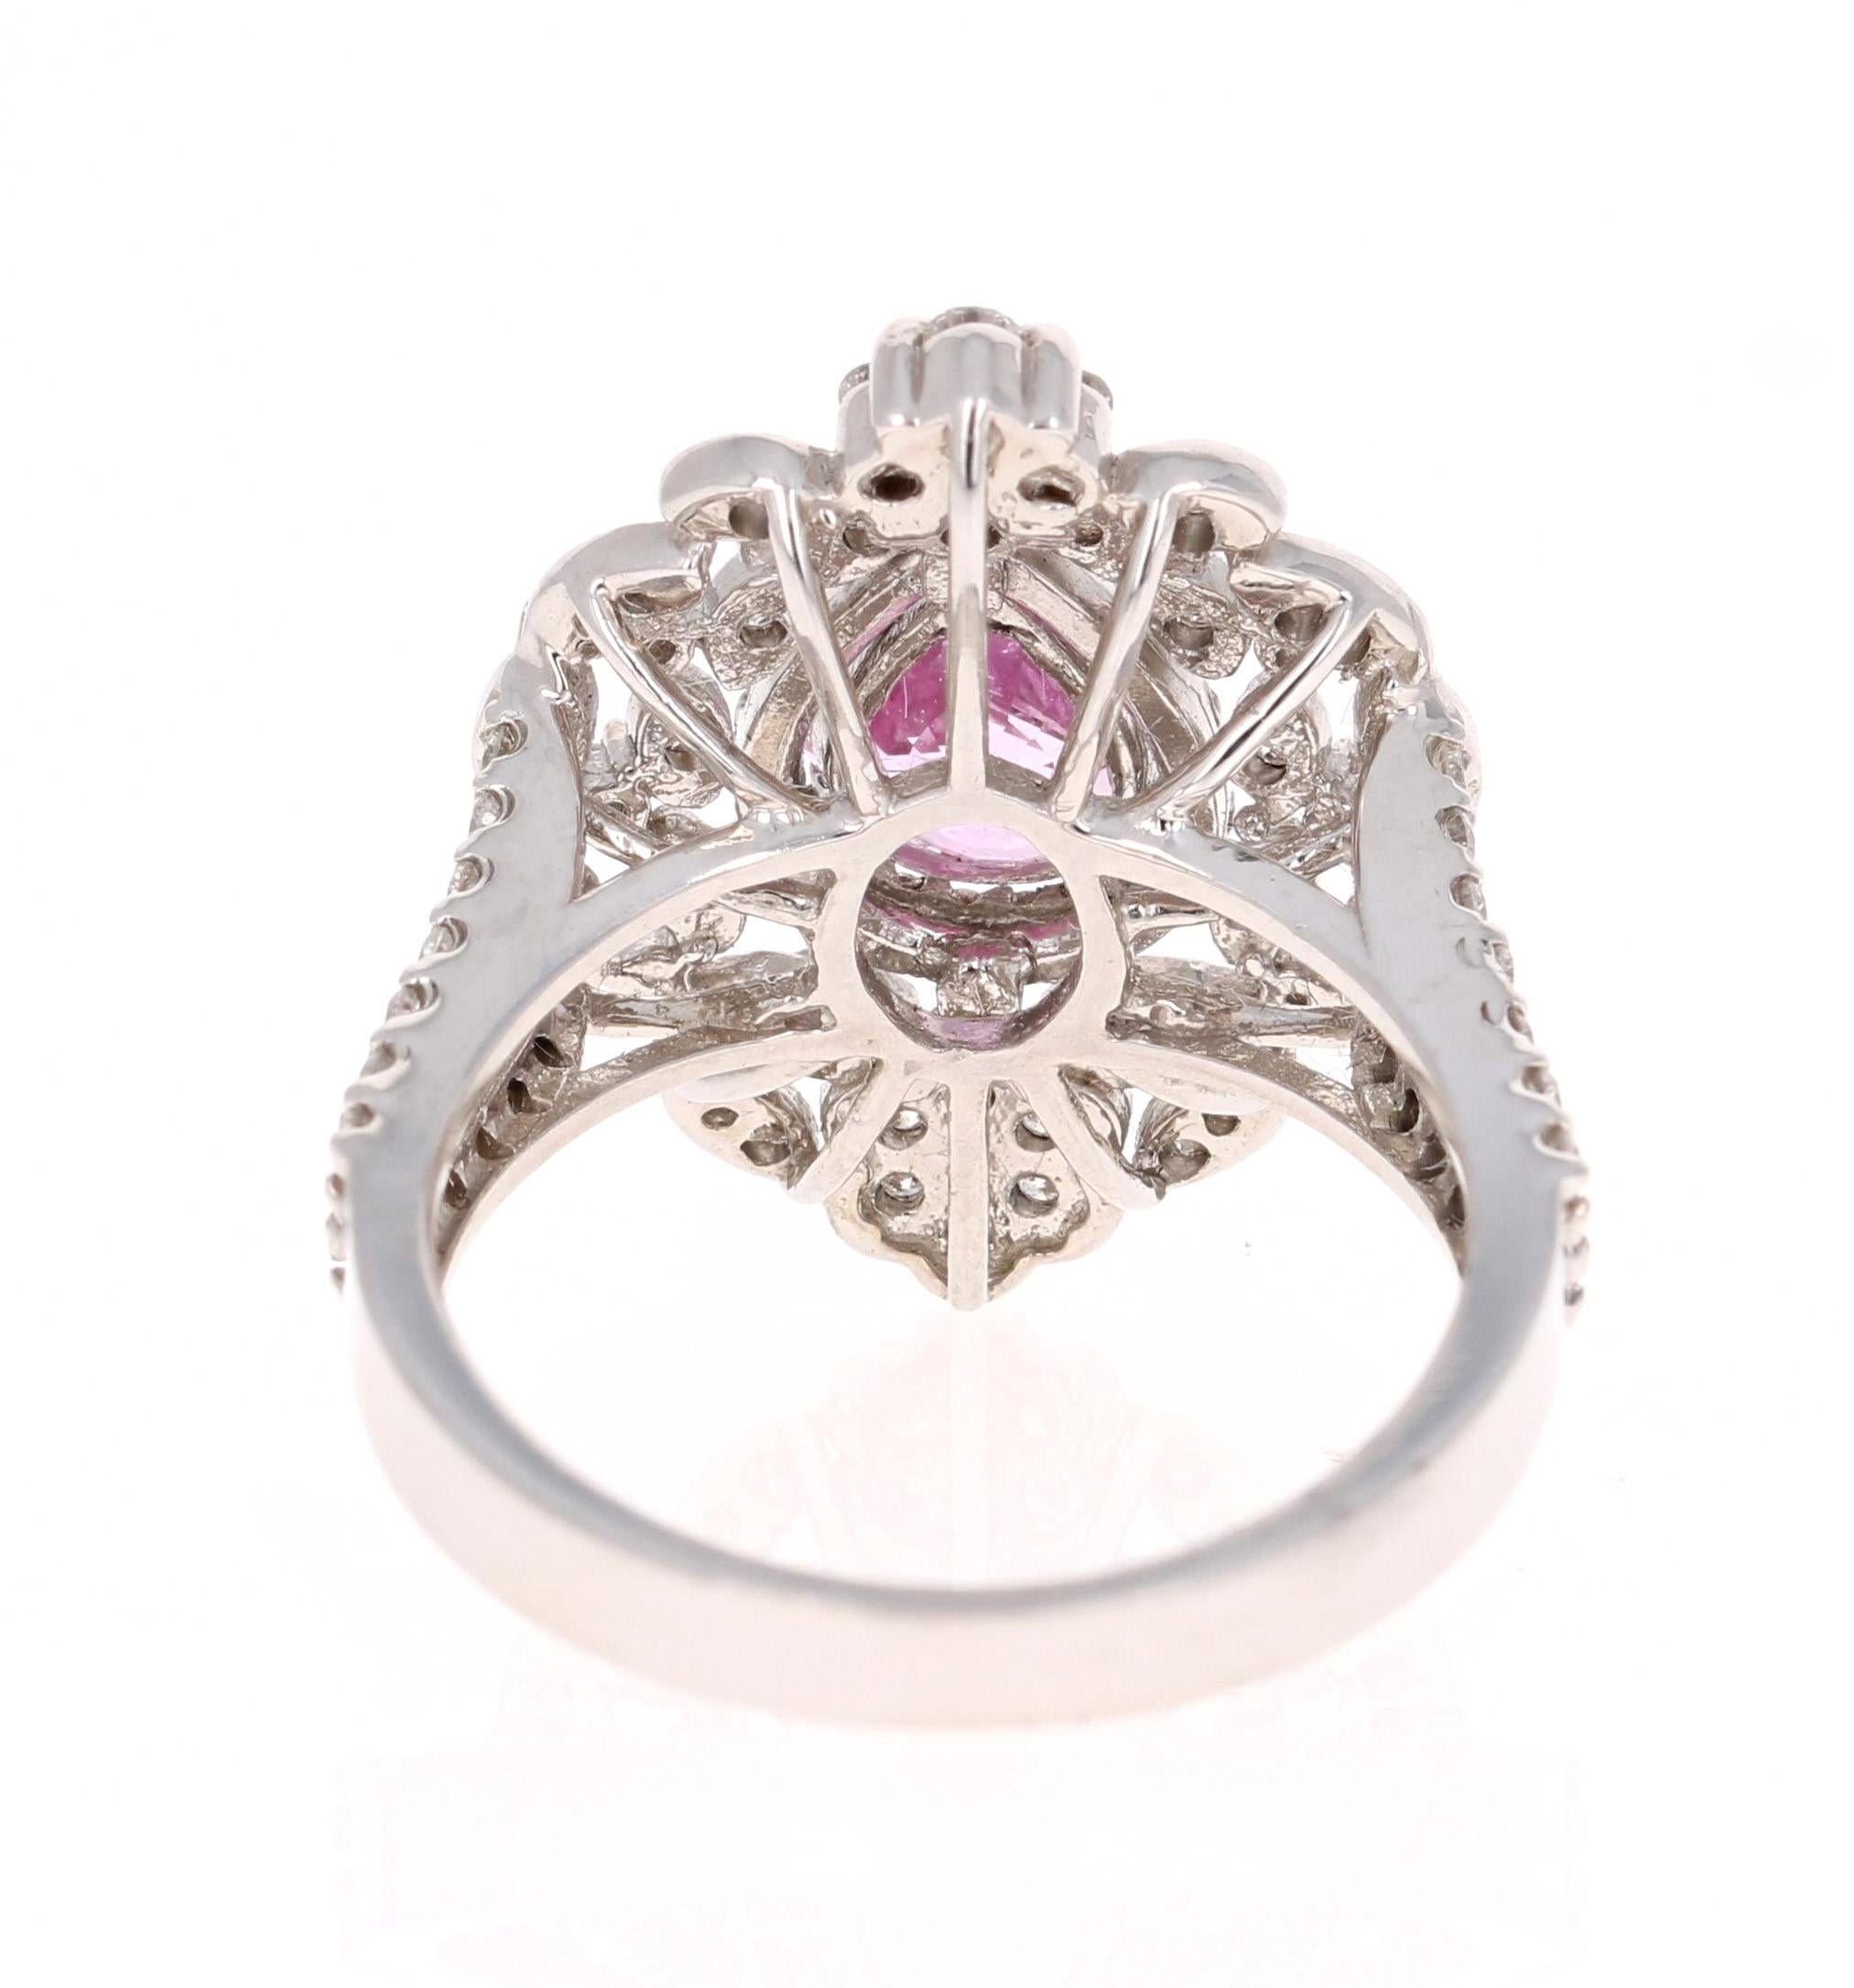 Pear Cut 2.75 Carat Pink Sapphire Diamond White Gold Cocktail Ring